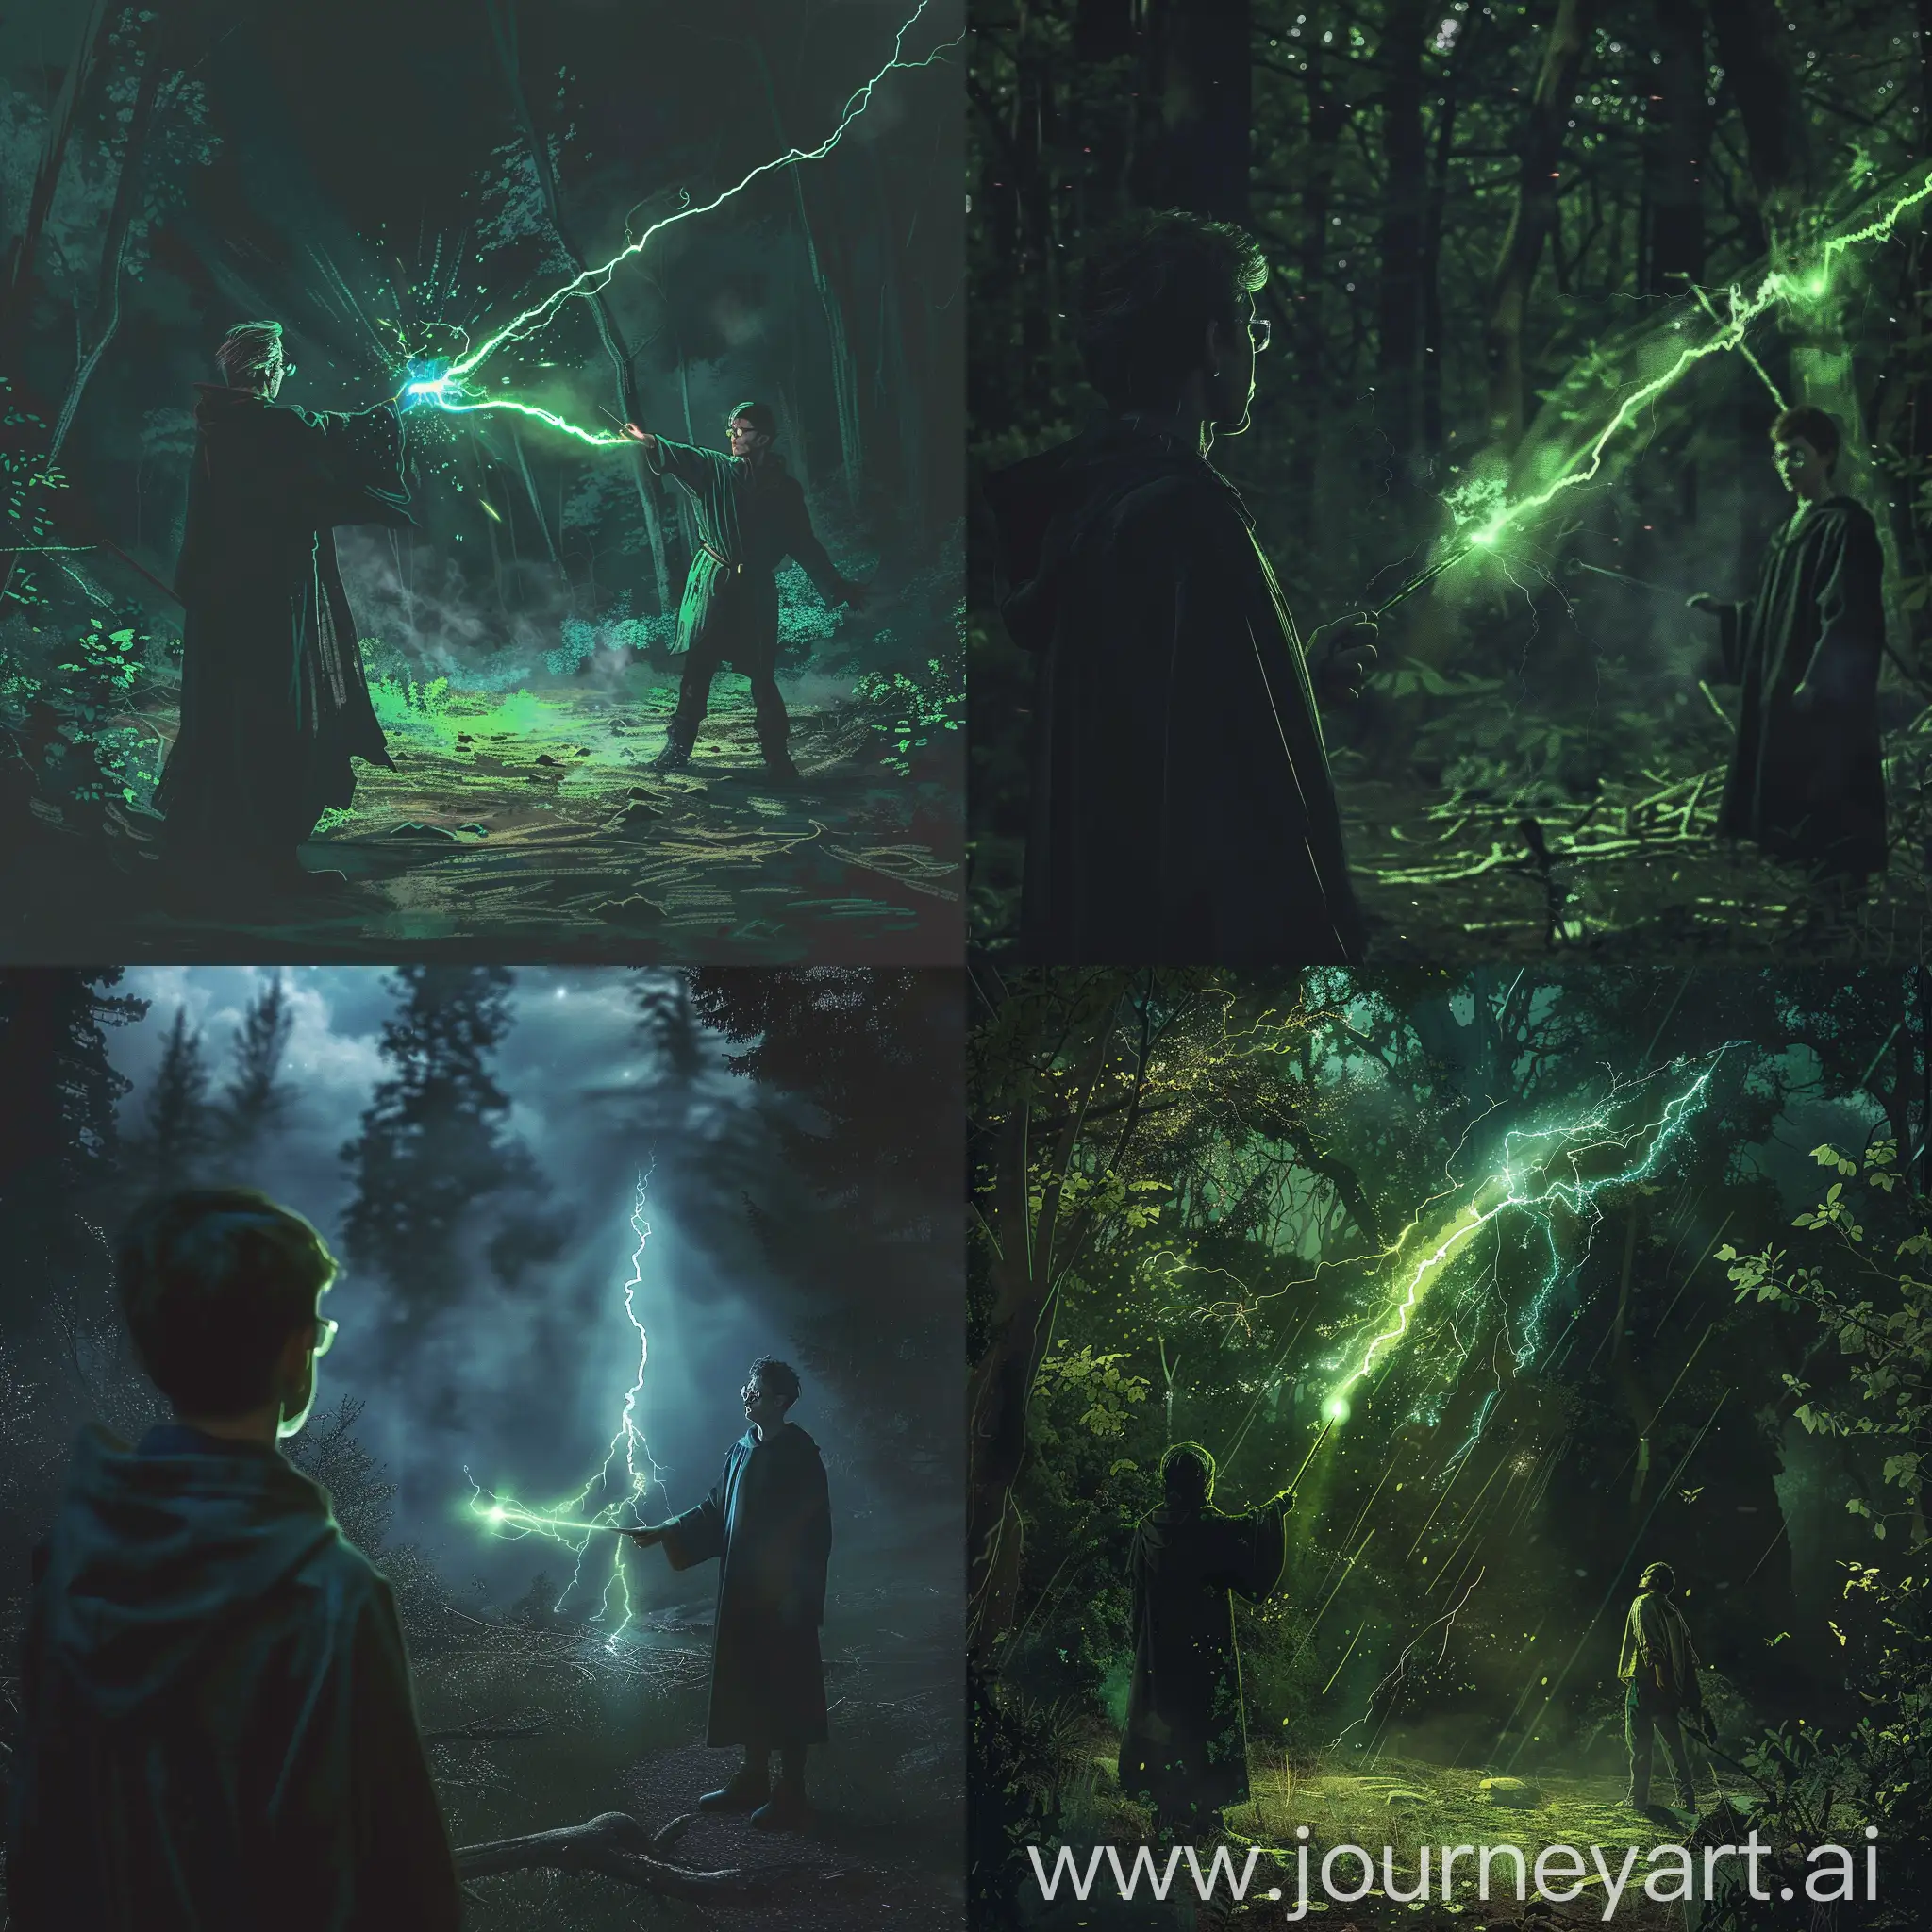 in a clearing in a close night forest there is a dark wizard pale gray skin red eyes dressed in a black robe shooting green lightning from his magic wand at a young man of seventeen years old standing in the distance 15-20 meters away wearing round glasses with a lightning scar on his forehead. epic lighting